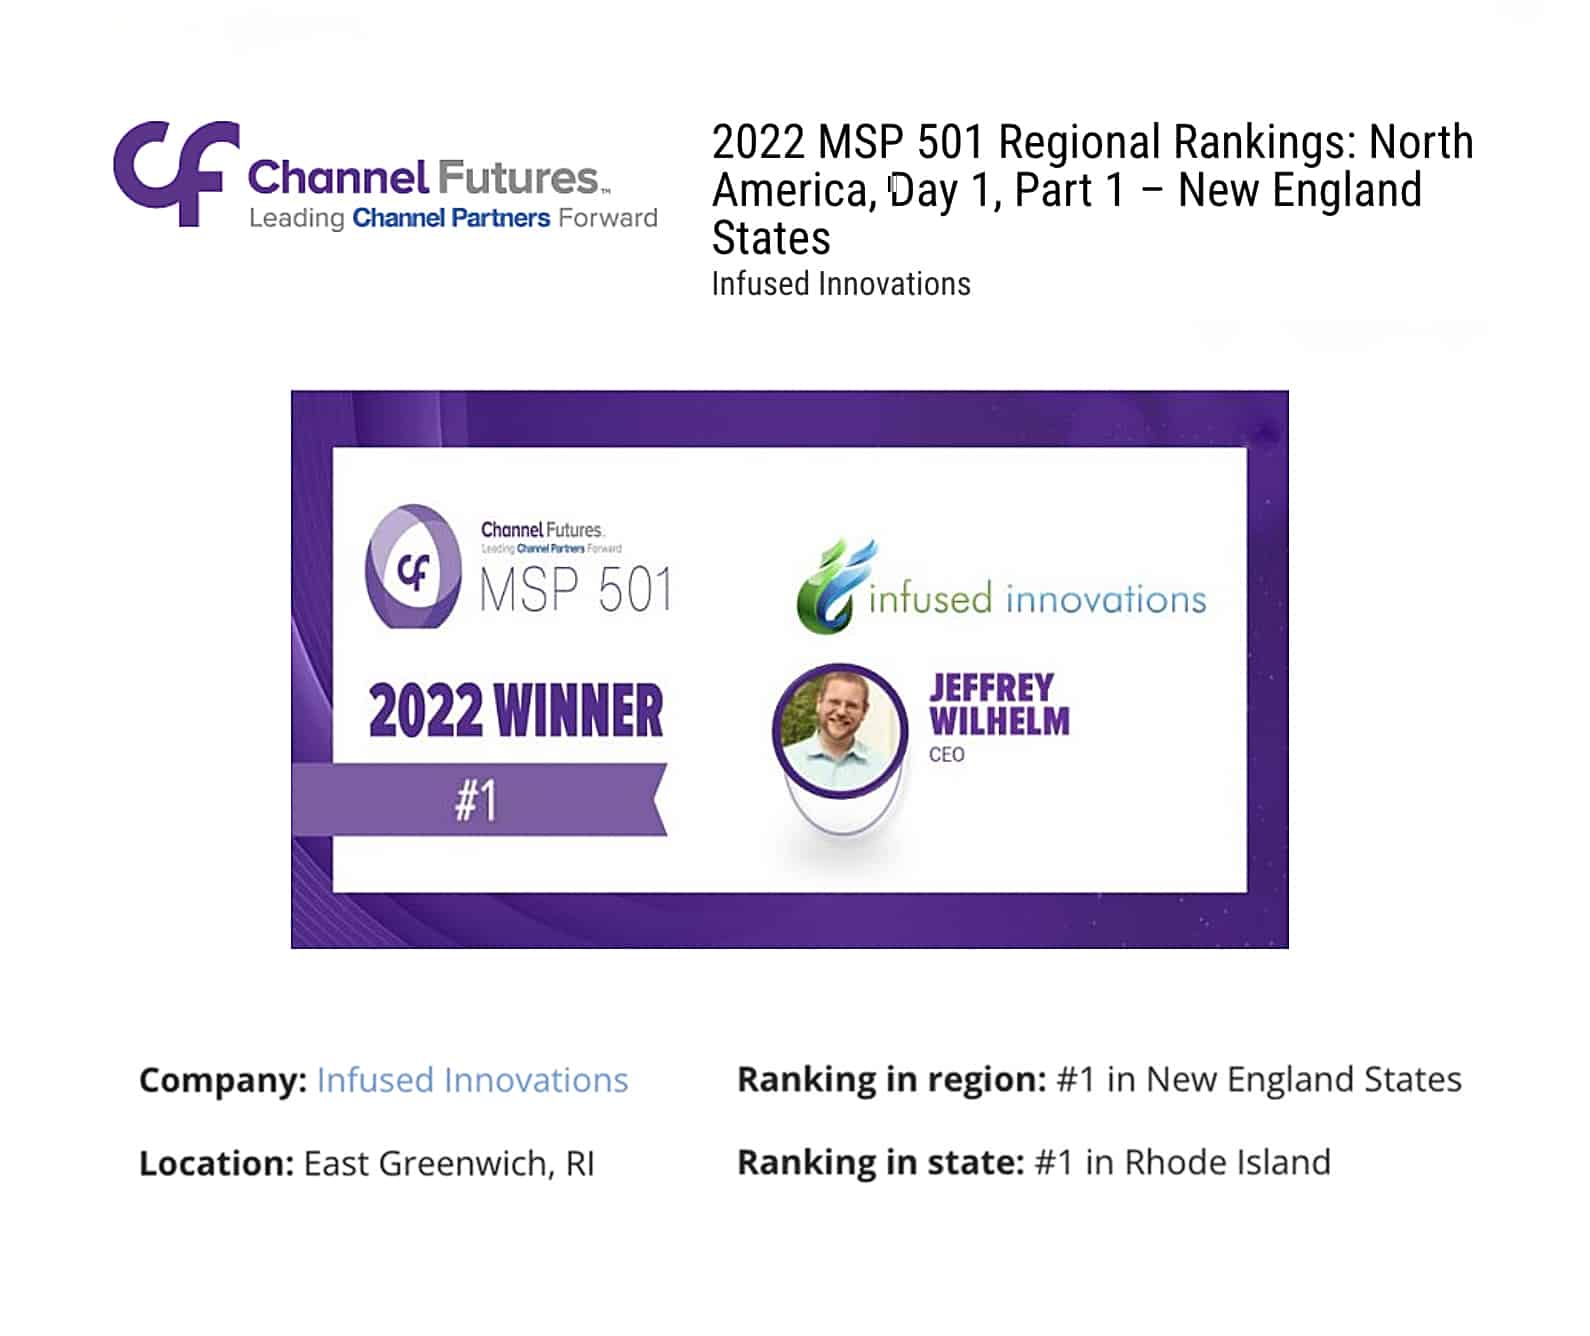 Infused Innovations Places #1 in Channel Futures' 2022 MSP 501 New England Regional Ranking 20